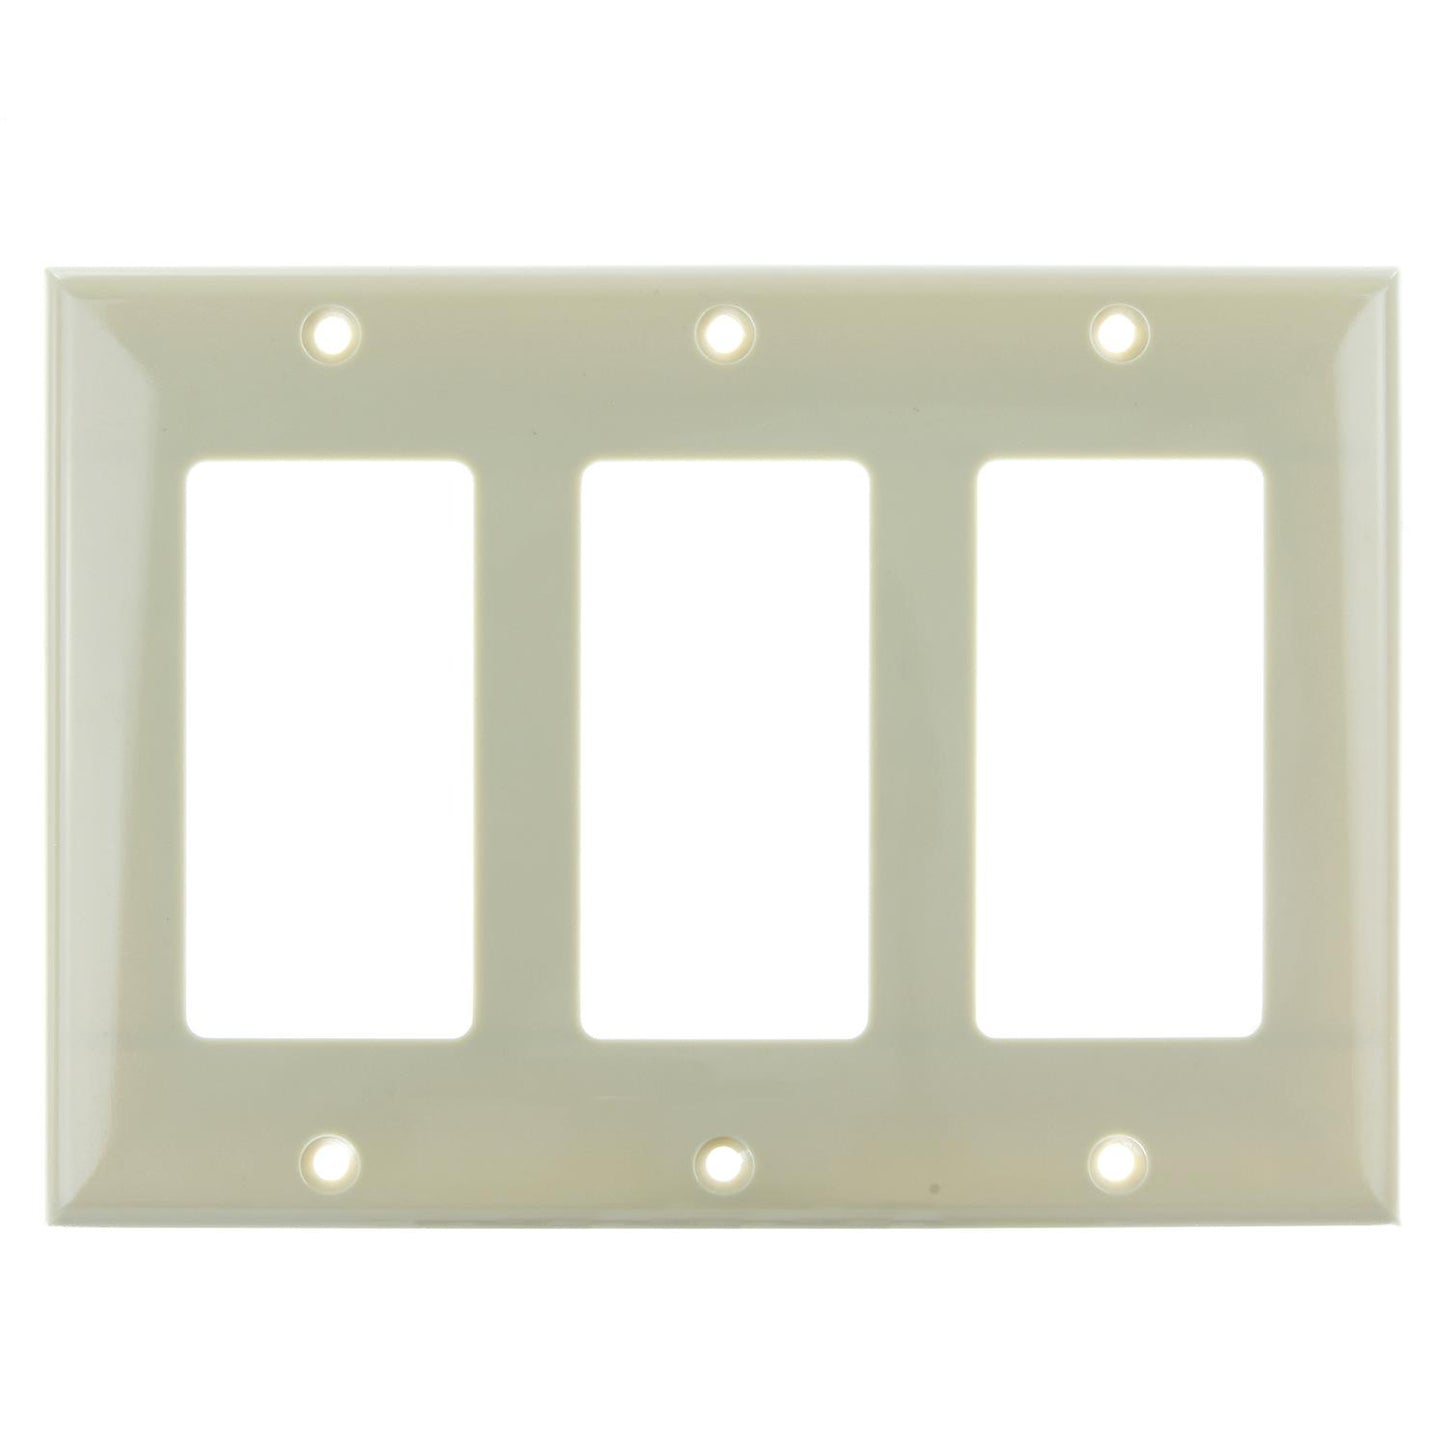 Sunlite E303/I 3 Gang Decorative Switch and Receptacle Plate, Ivory